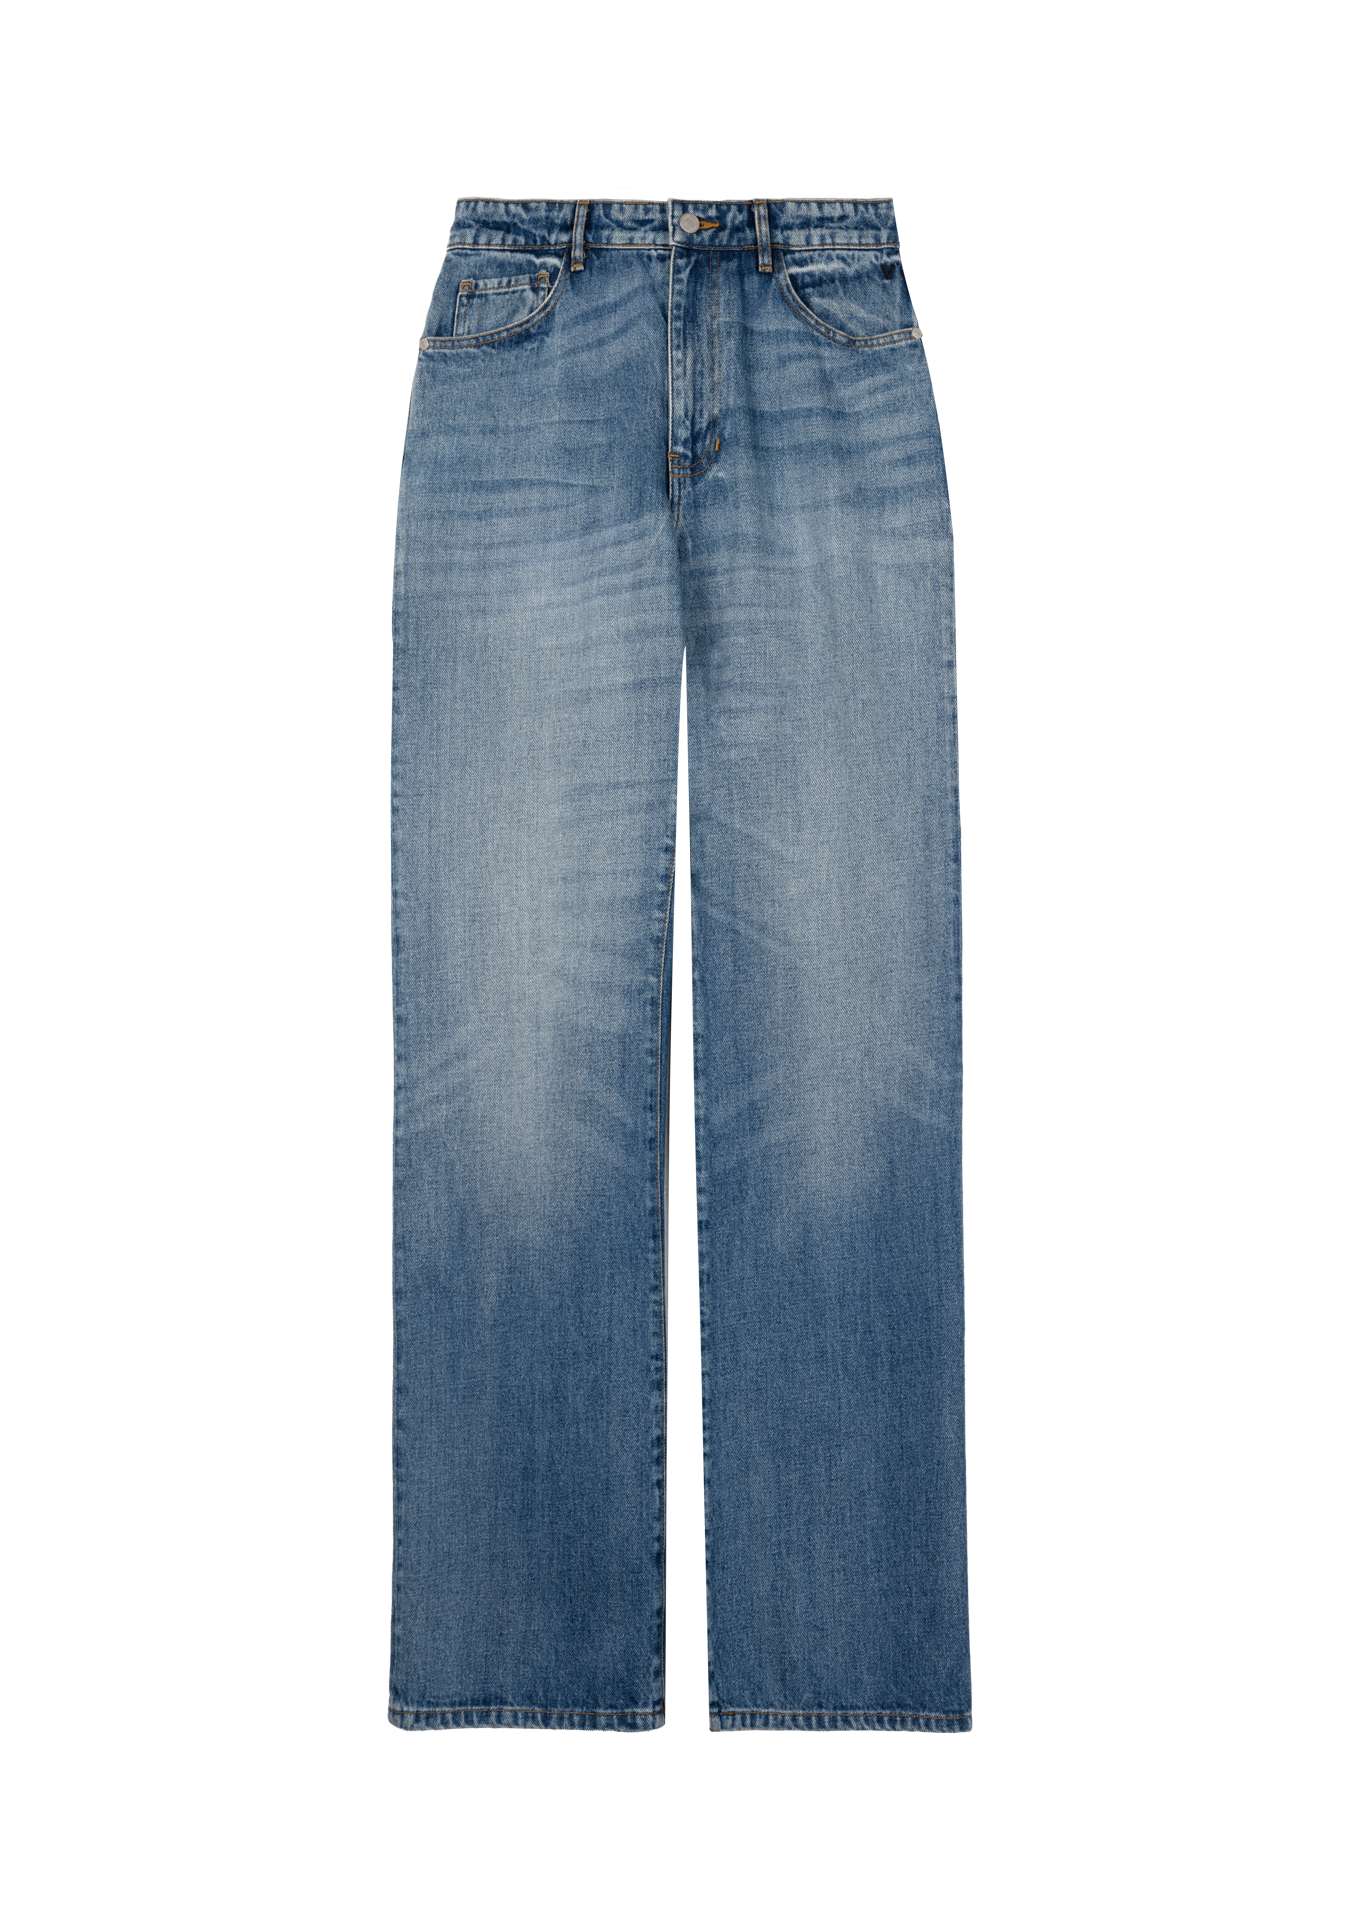 High-waist, straight-fit jeans